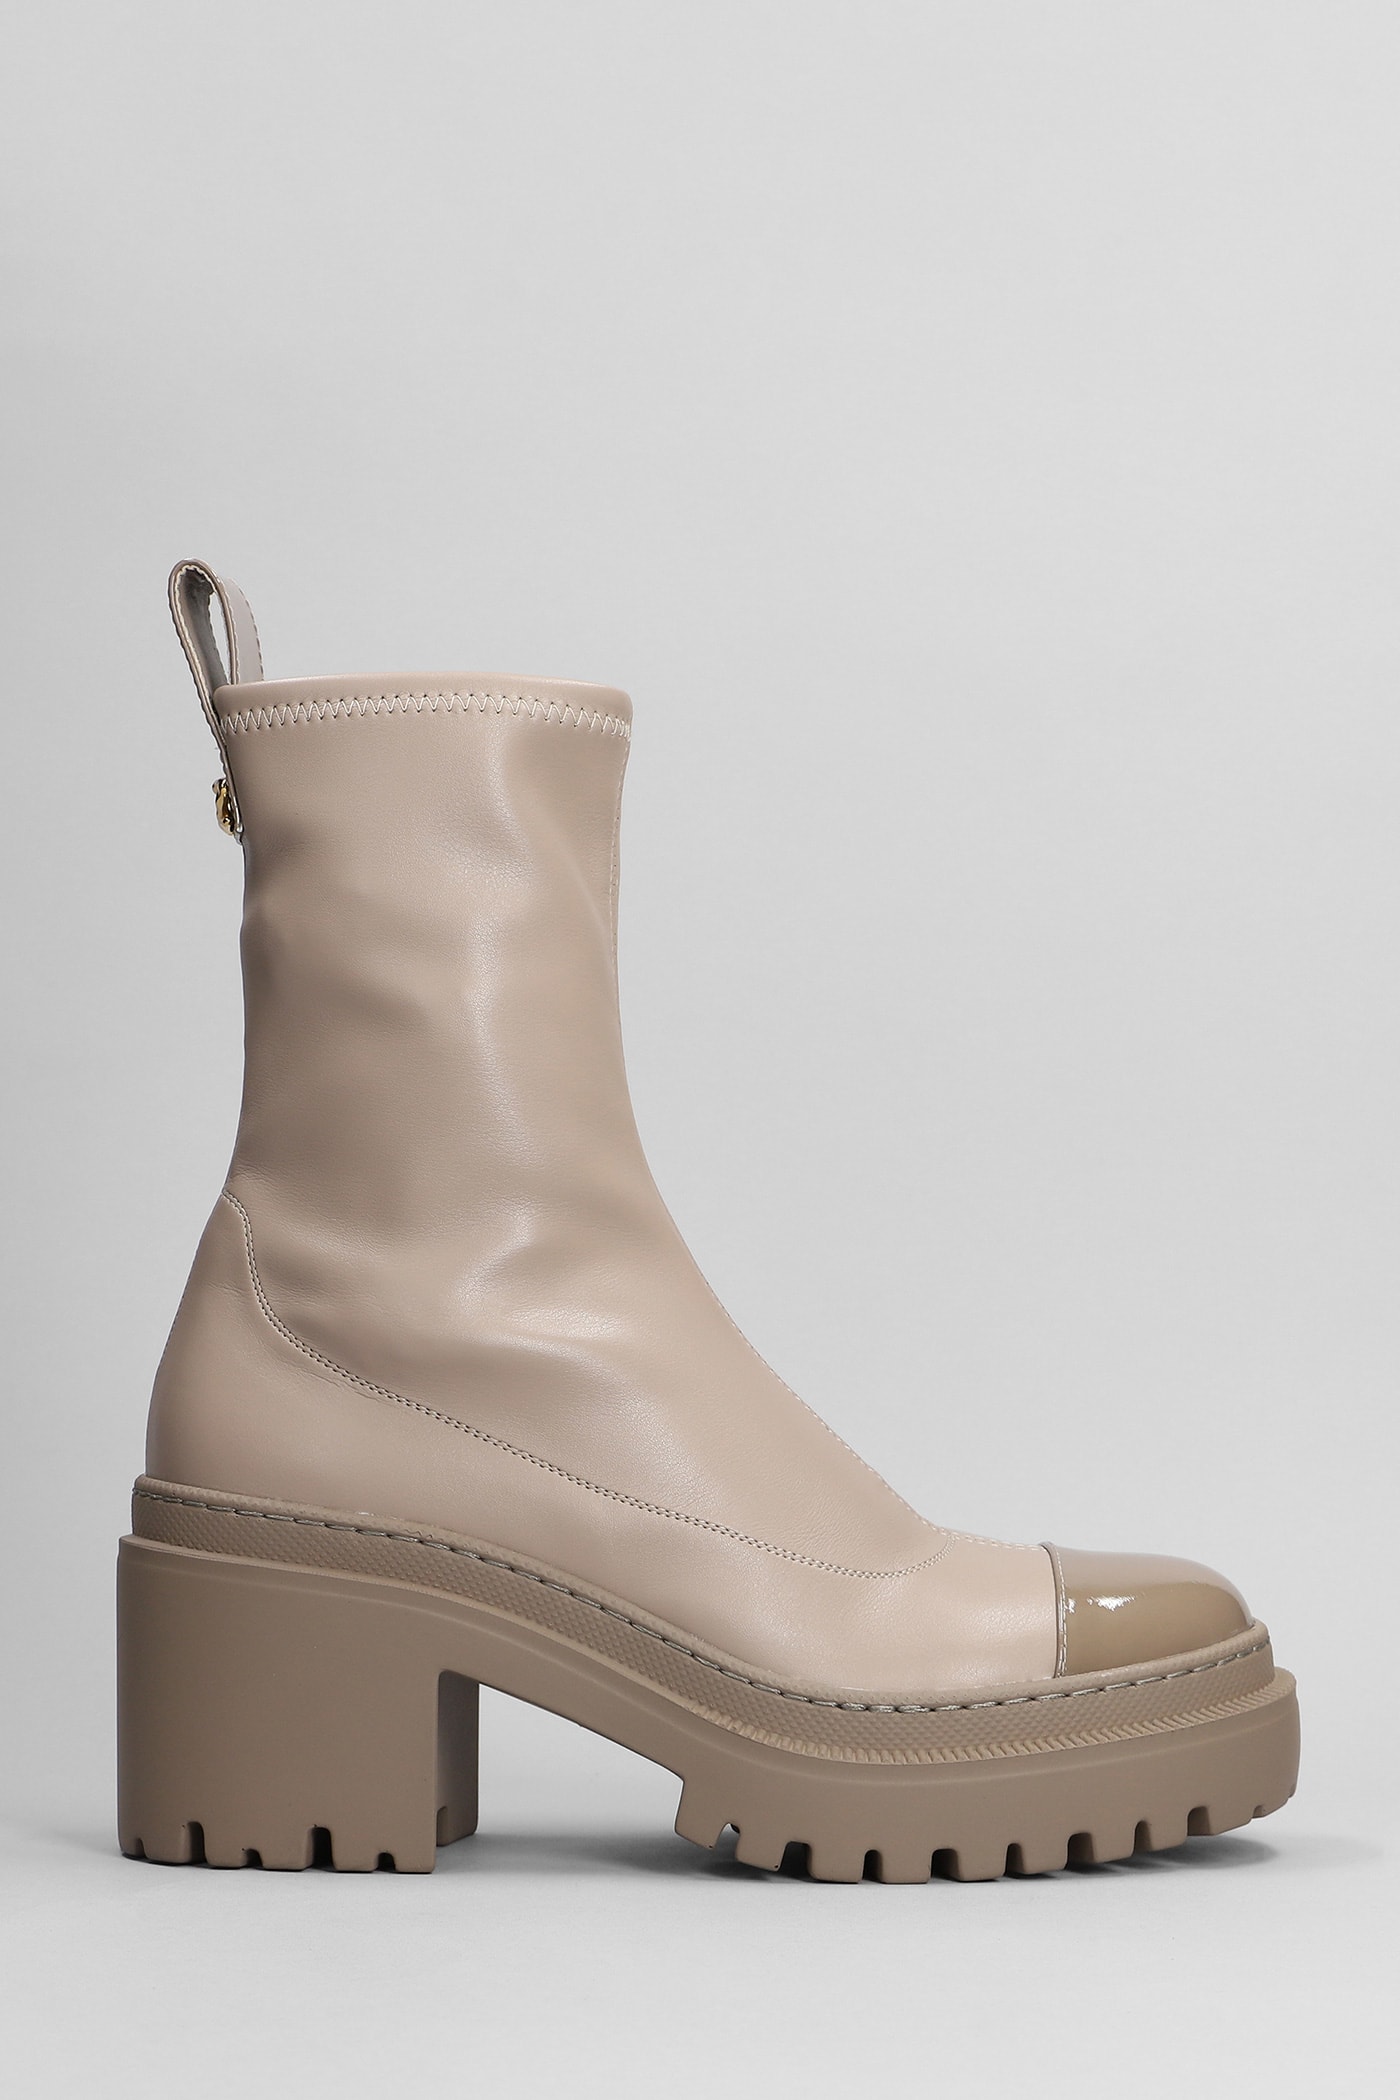 Giuseppe Zanotti Vicentha High Heels Ankle Boots In Beige Leather